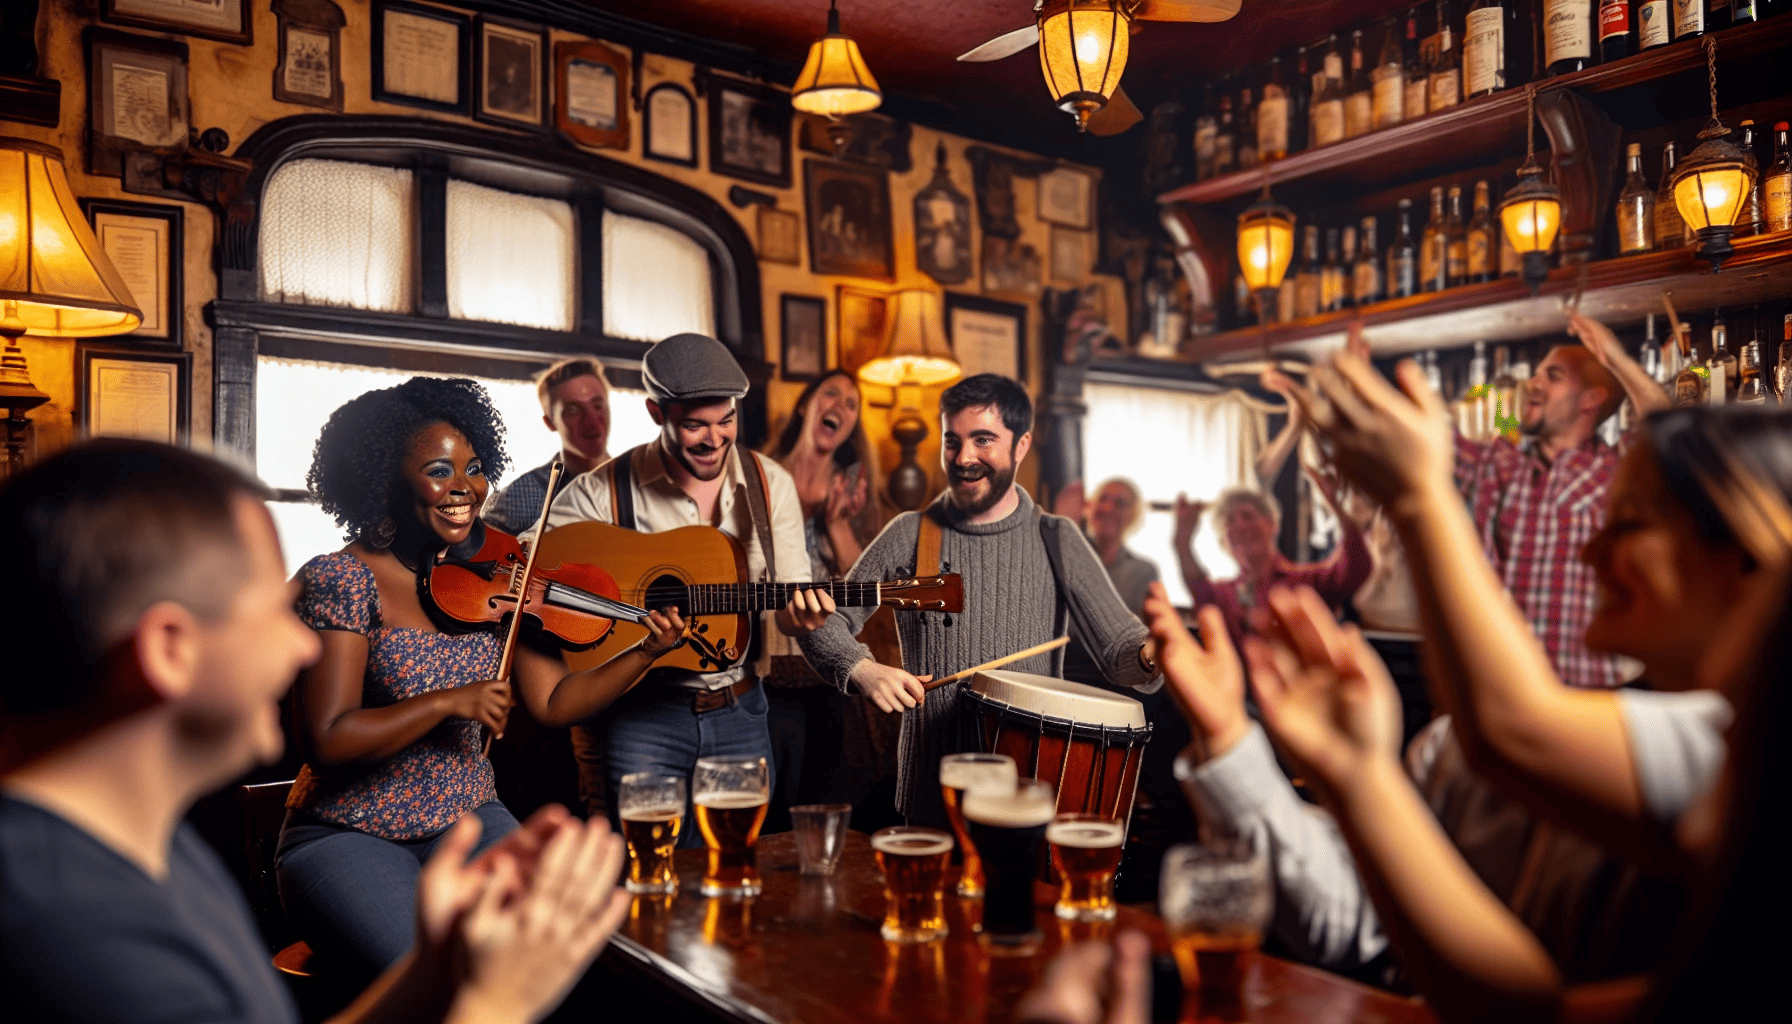 A lively Irish pub with musicians performing folk tunes